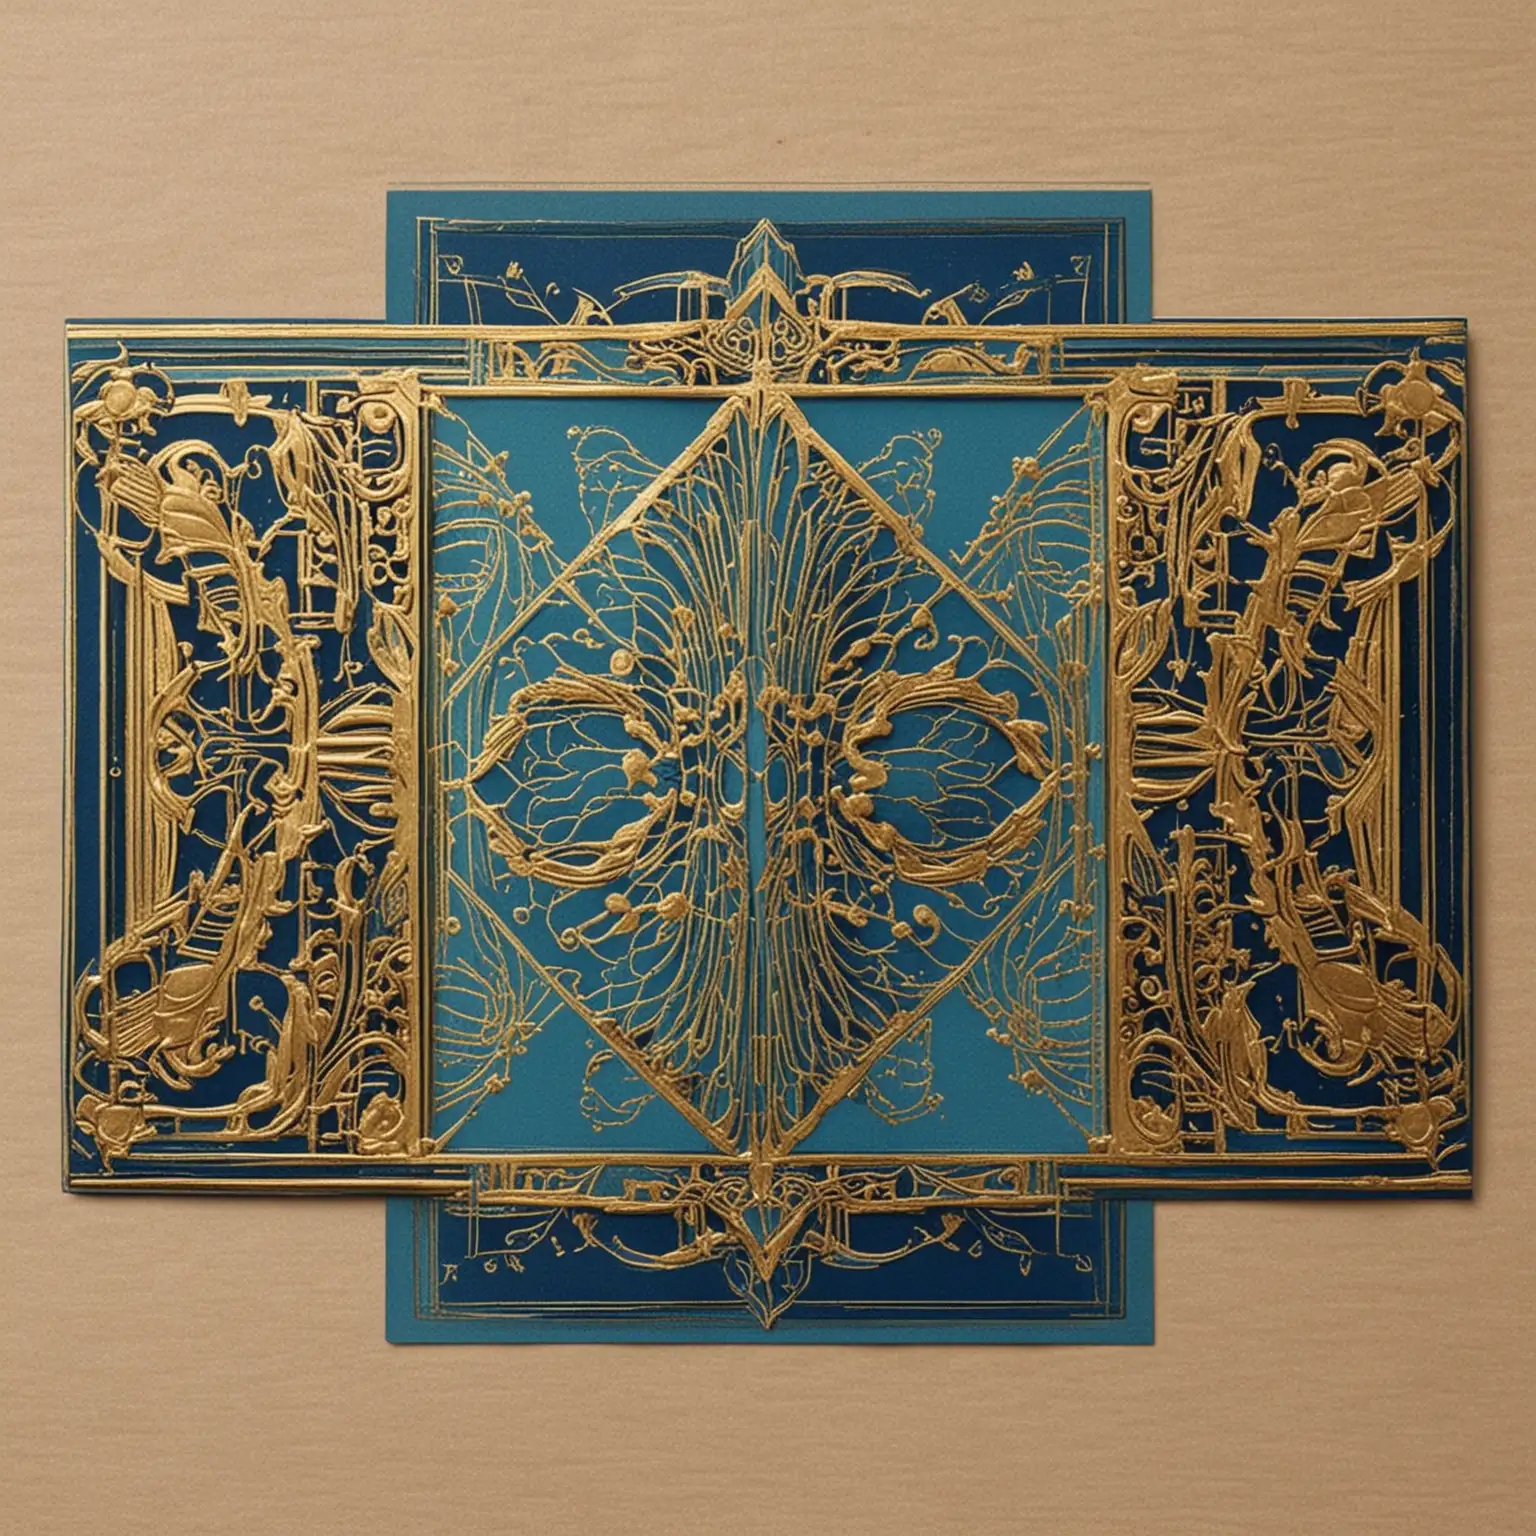 Card size 11.5 x 17 mm. Card to have narrow borders around the edge. Border to be art deco style in blue with gold elements